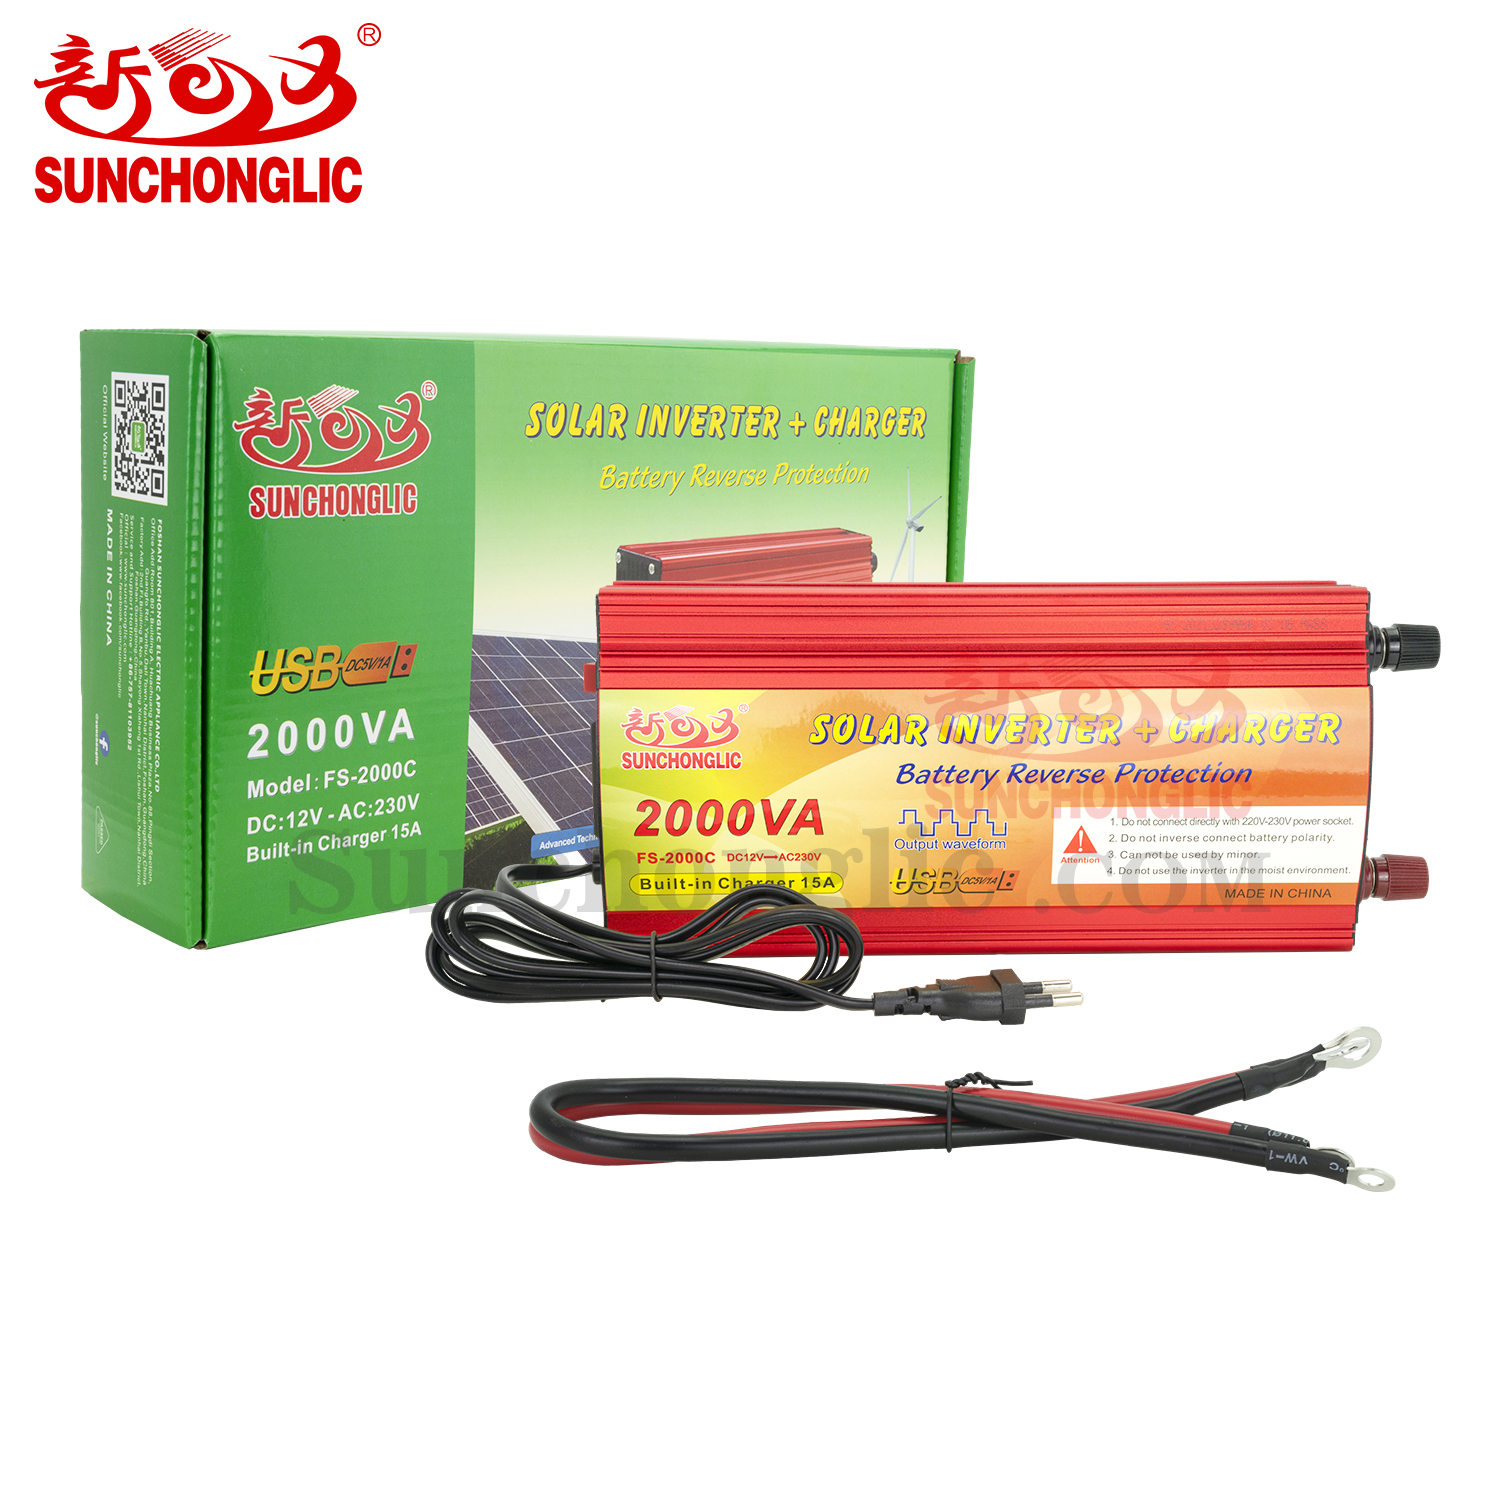 Inverter With Charger - FS-2000C